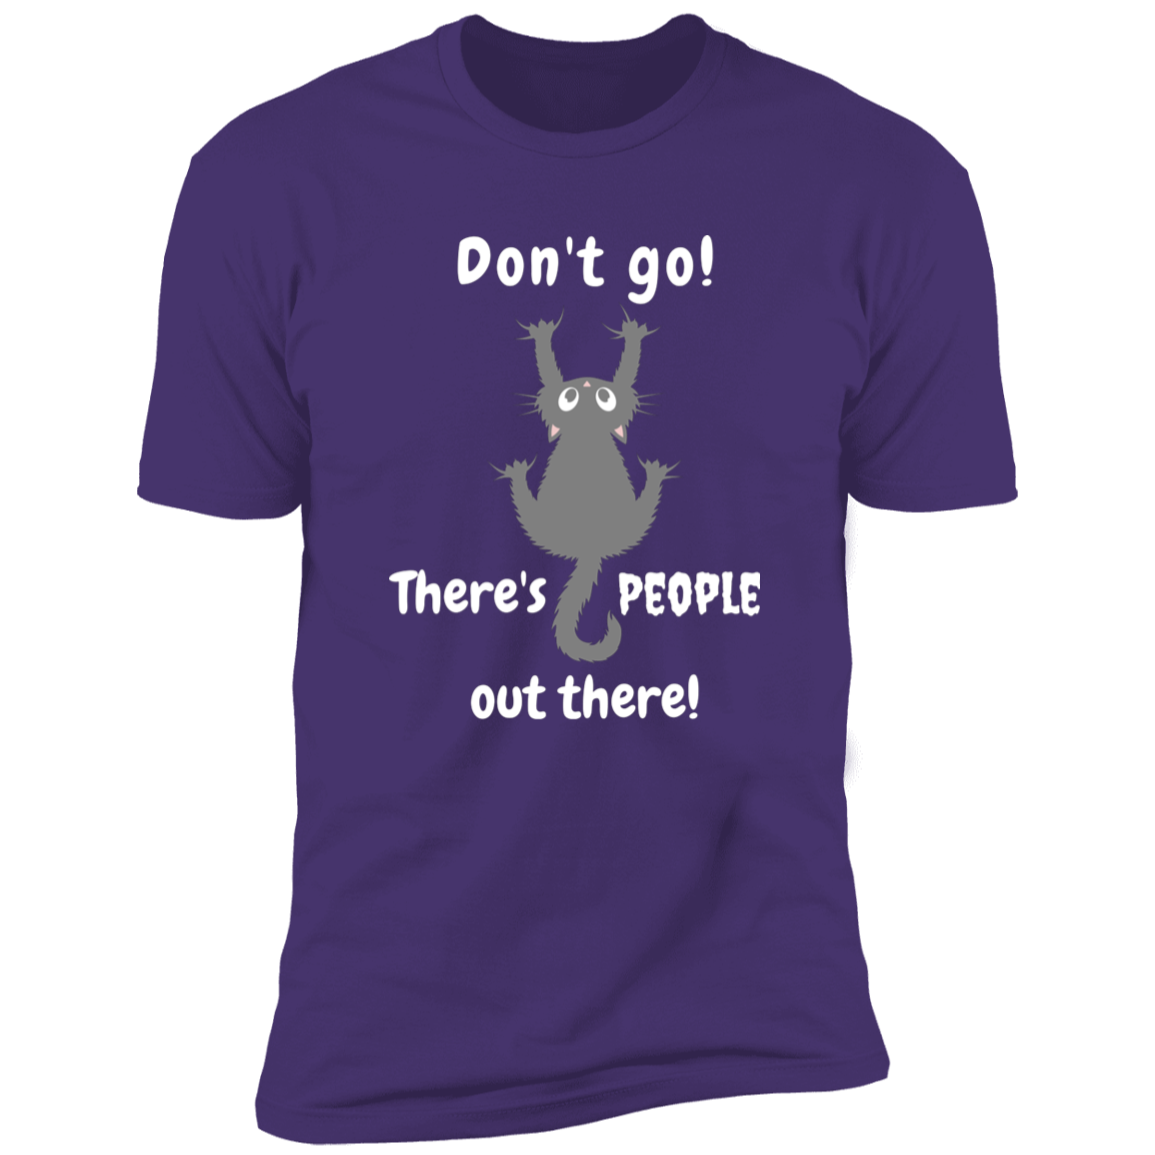 Don't Go! There are People Out there Shirt, funny cat shirt for humans, cat mom and cat dad shirt, in purple rush